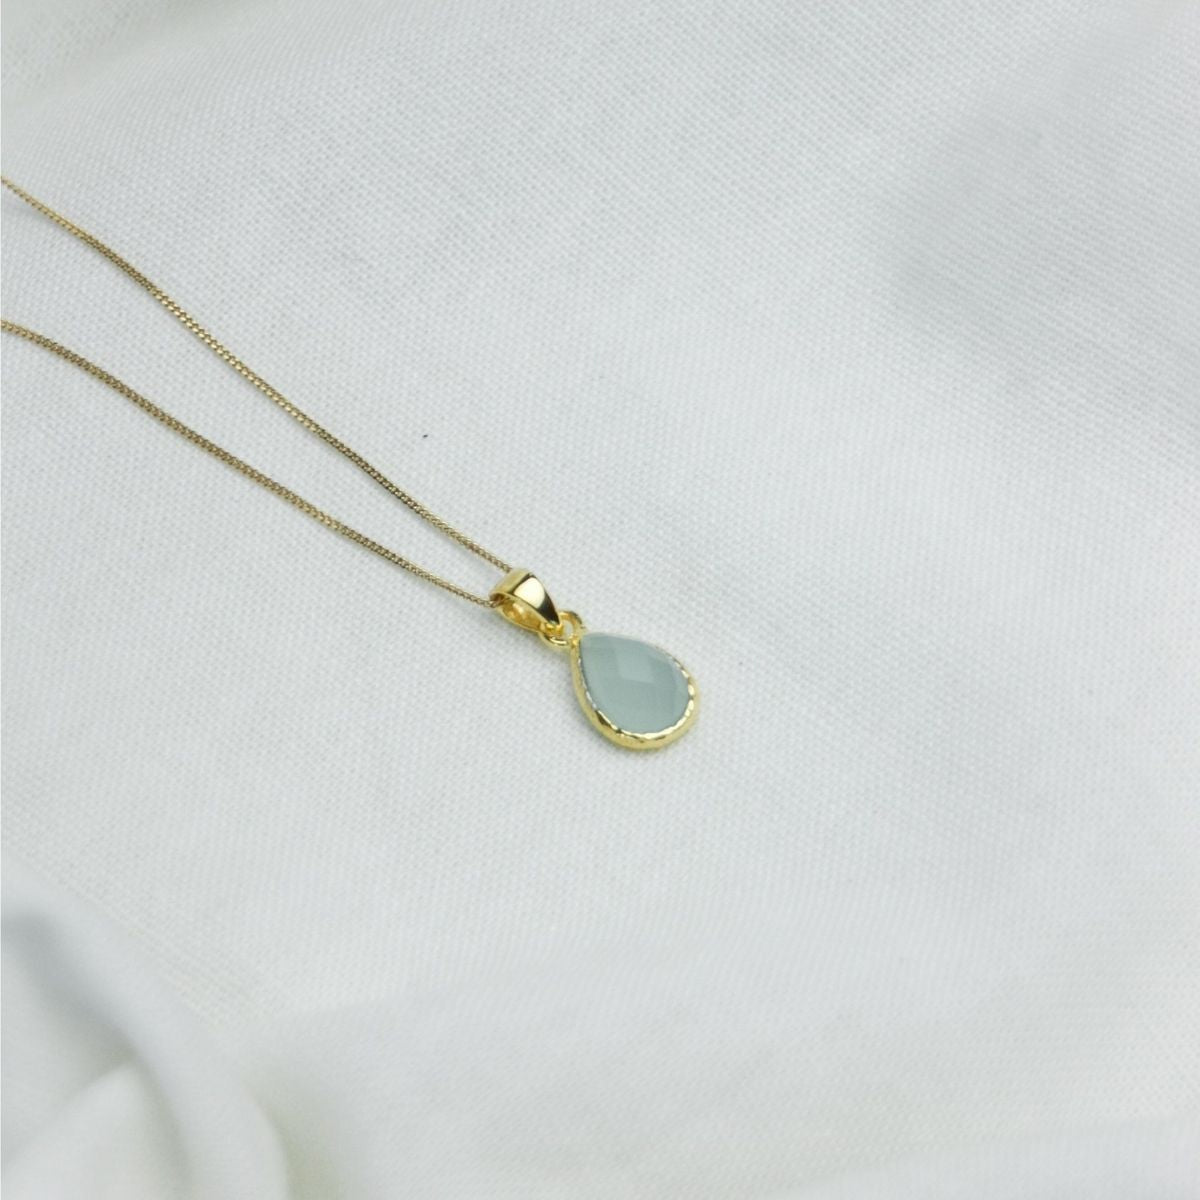 a blue pendant necklace on a white cloth